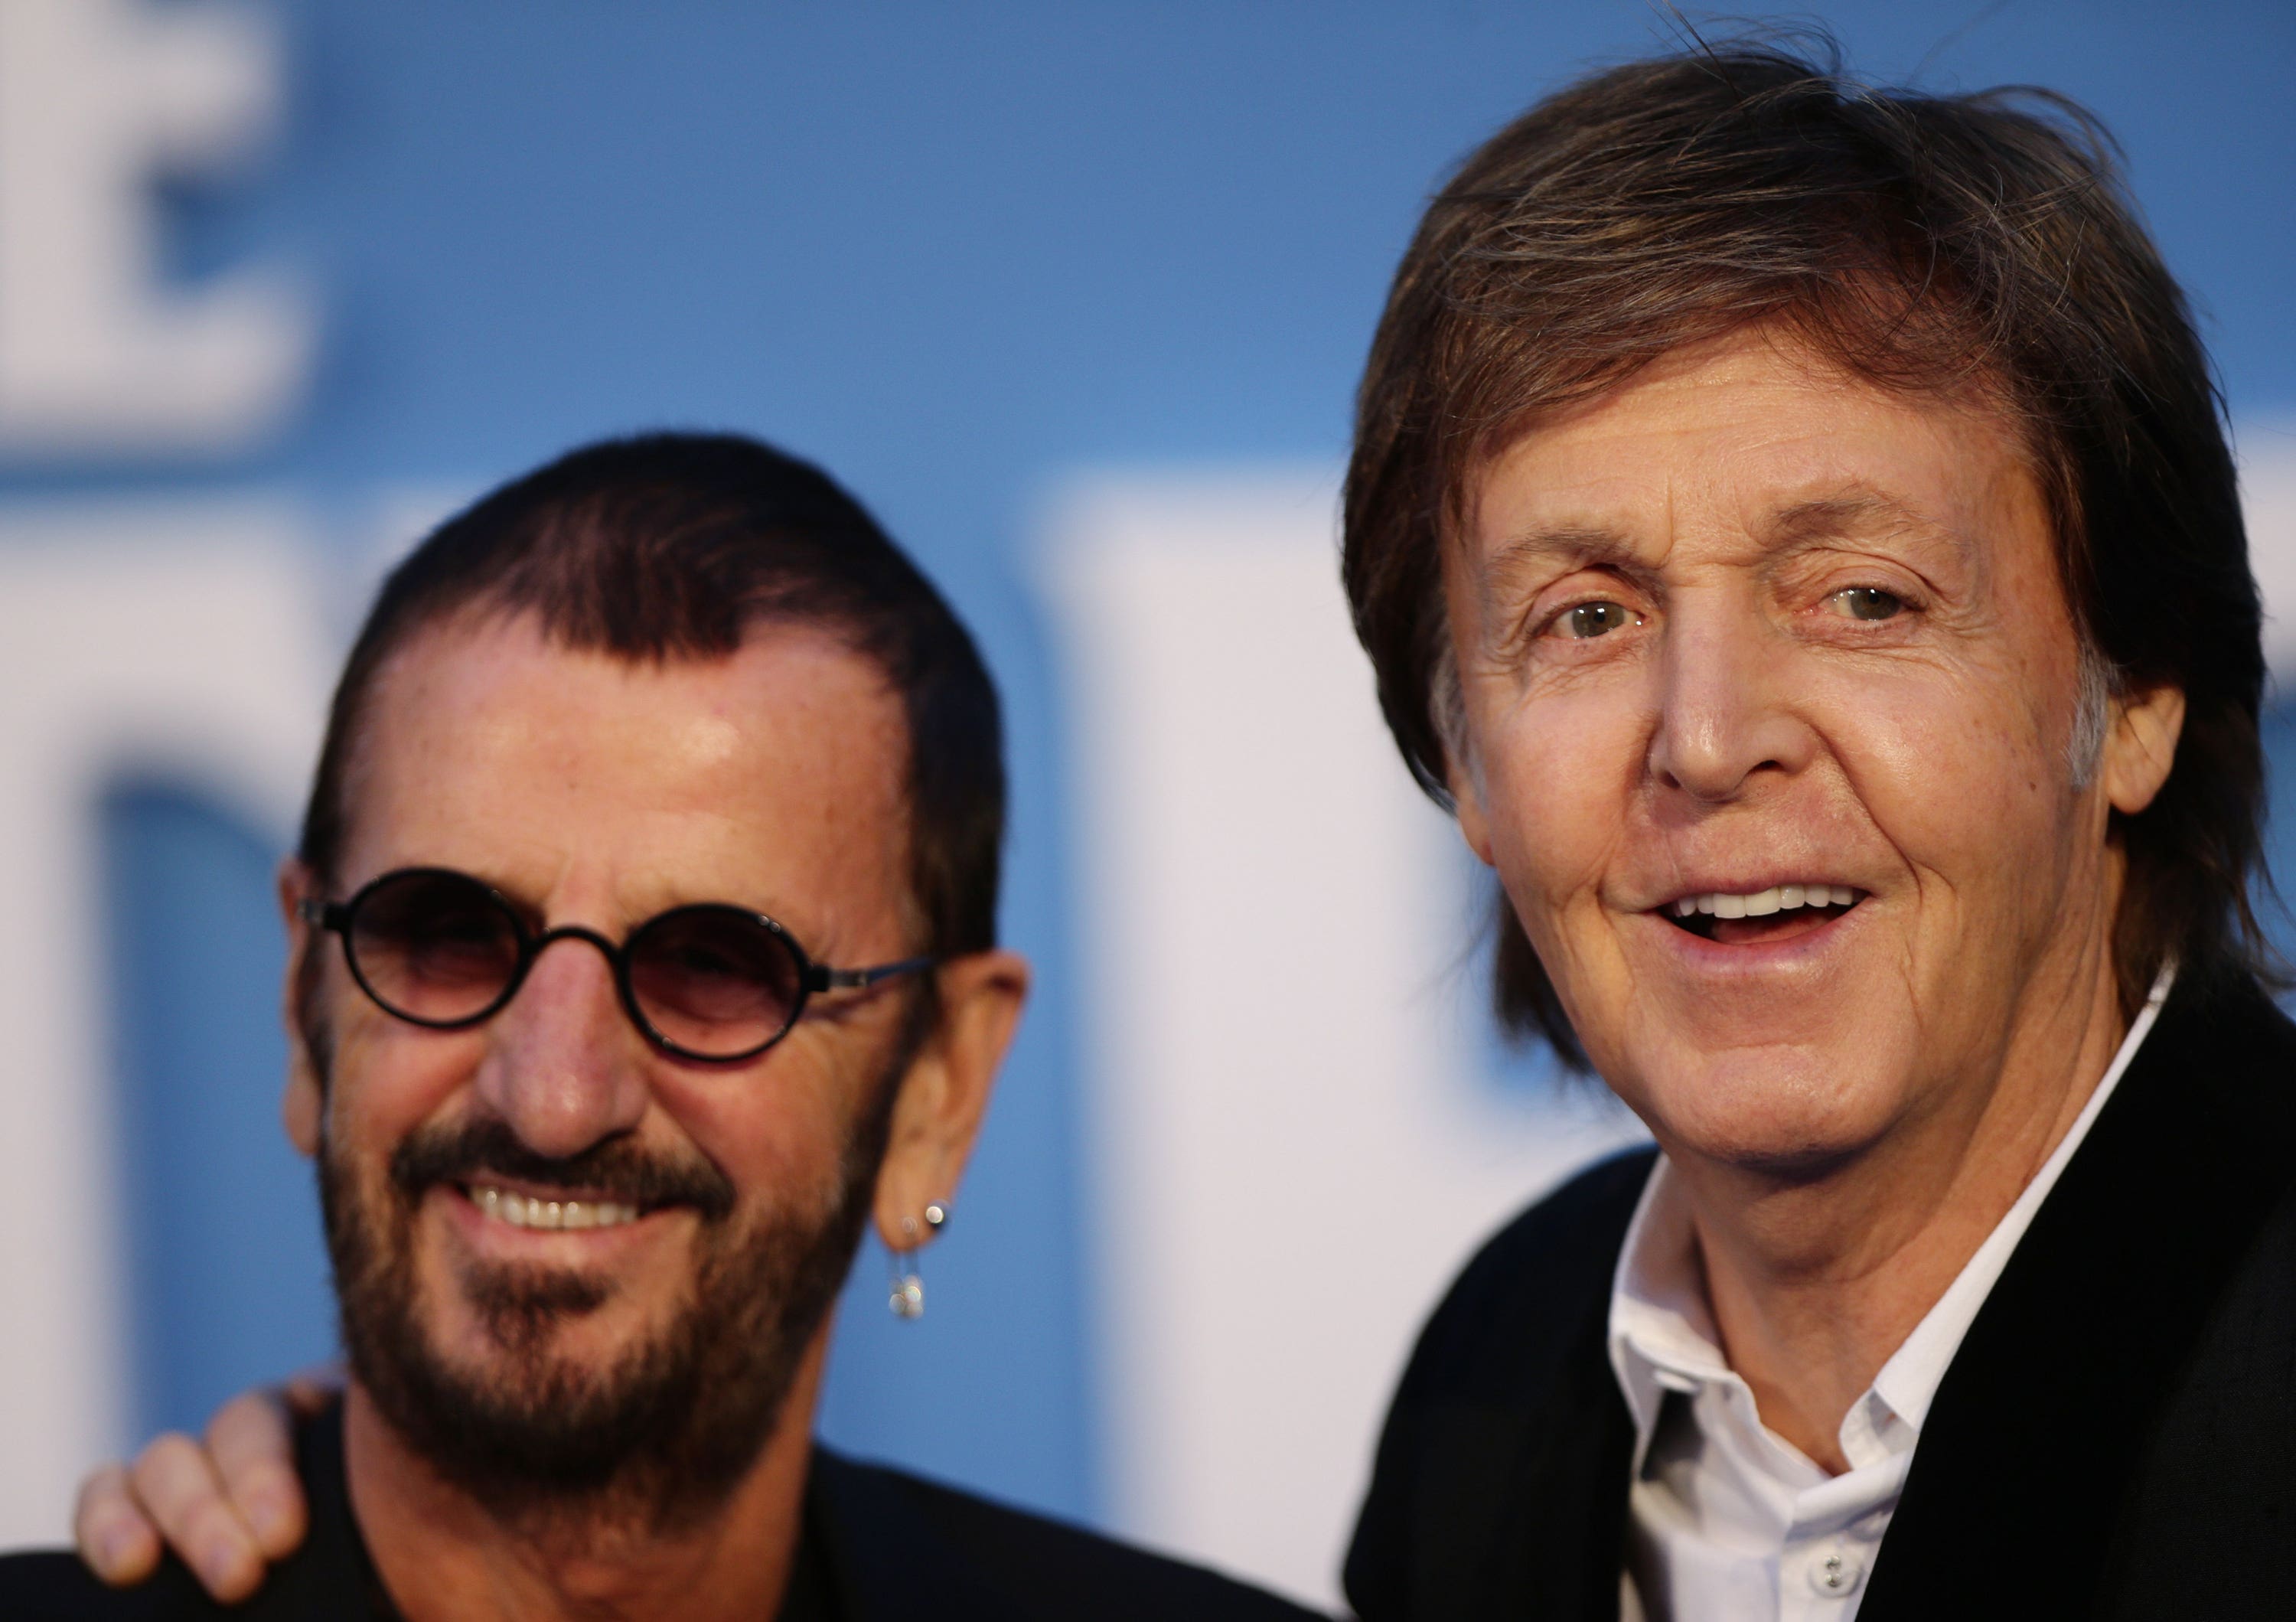 Surviving members of The Beatles Ringo Starr and Paul McCartney pictured in 2016.